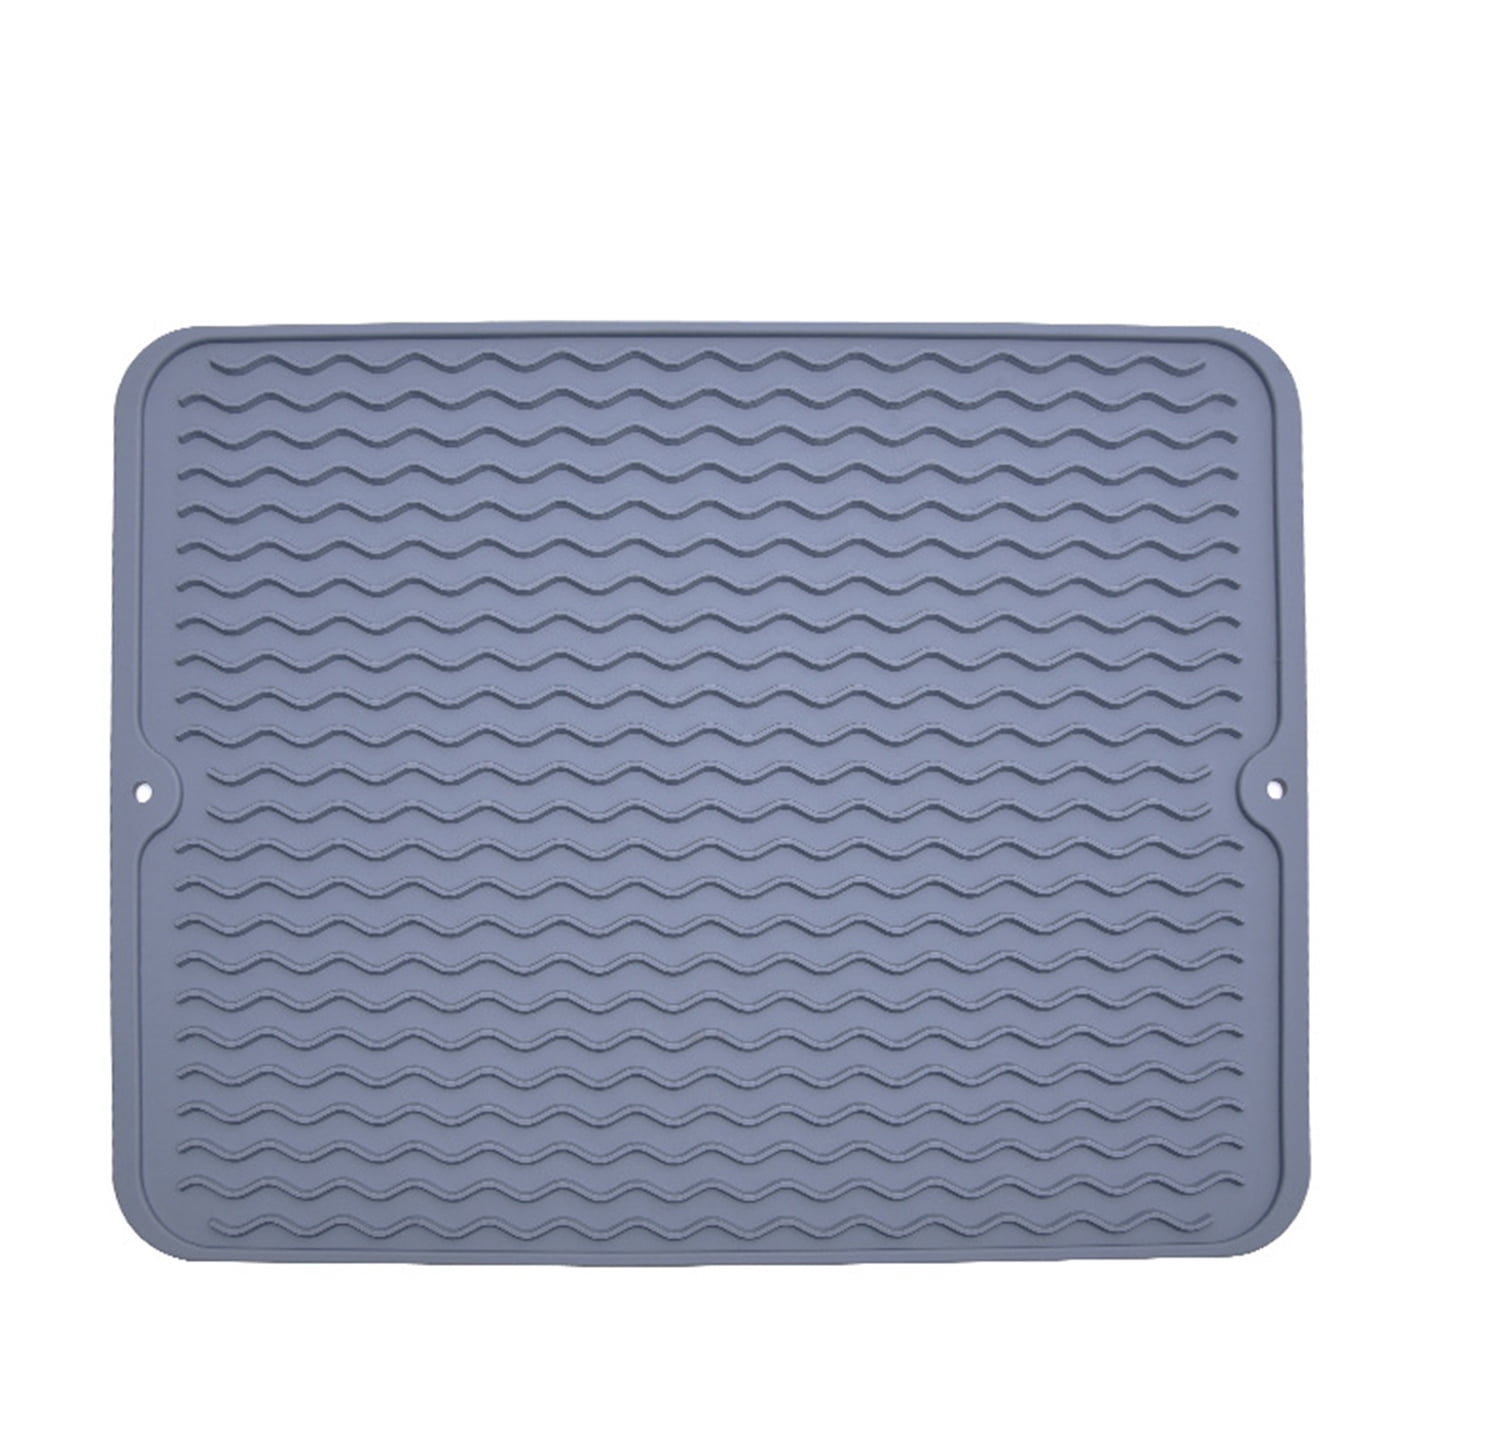 Fdit Silicone Drain Mat Rectangle Drying Dishes Pad Heat Resistant  Slip-Proof Tray(Grey)